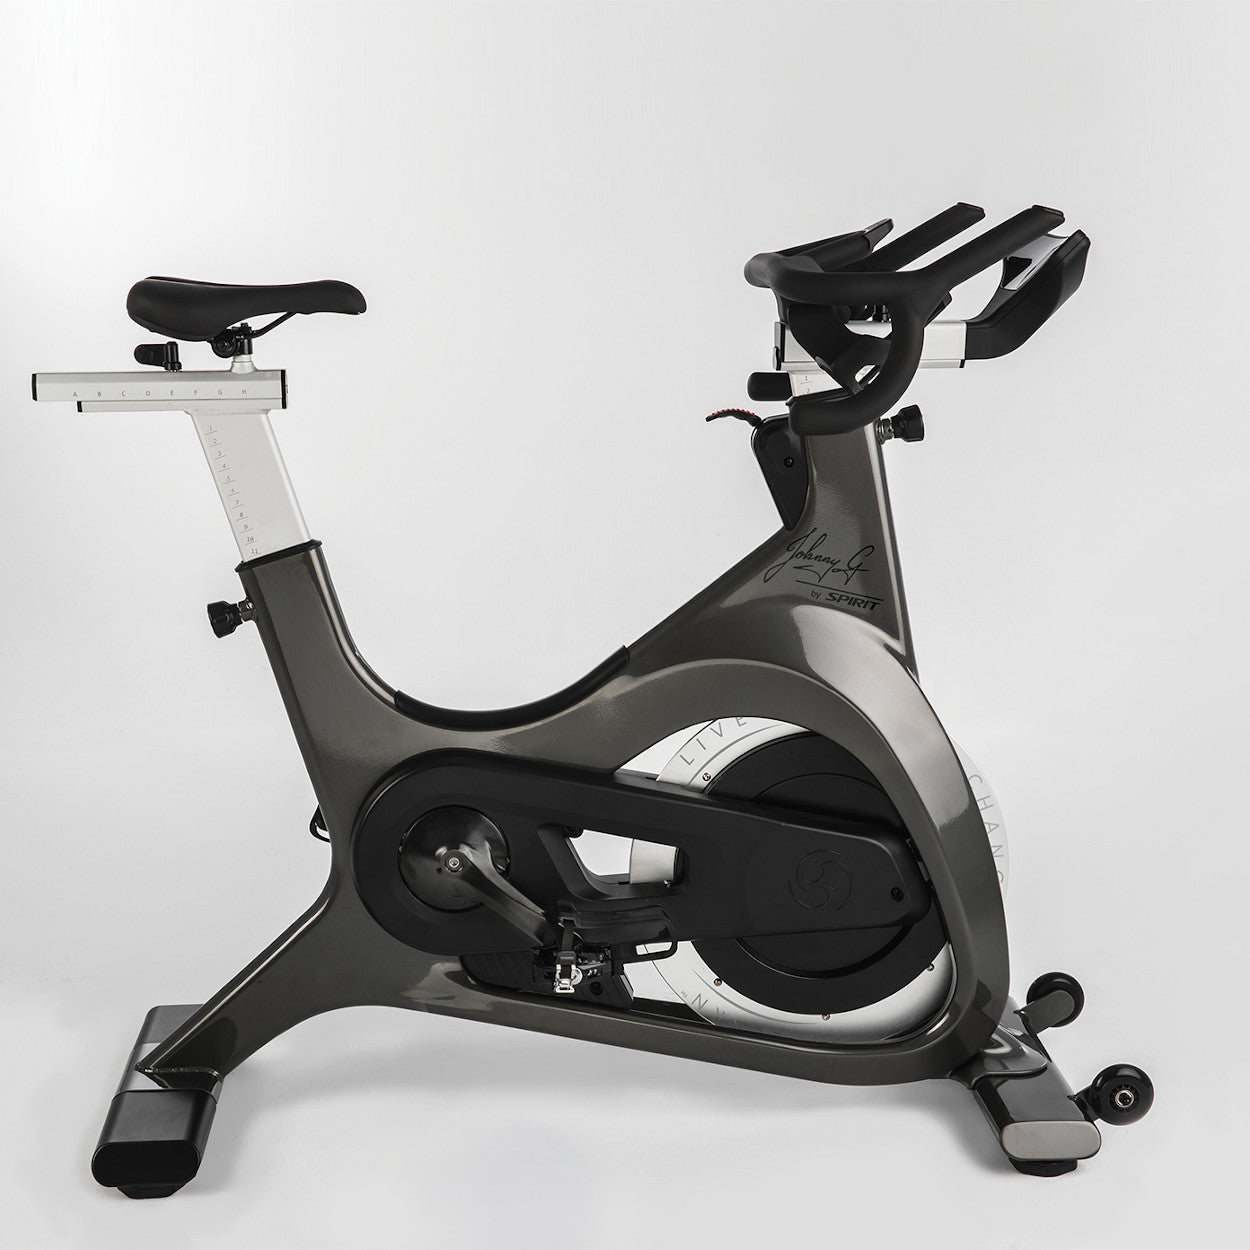 Johnny G Commercial Indoor Cycling Bike.